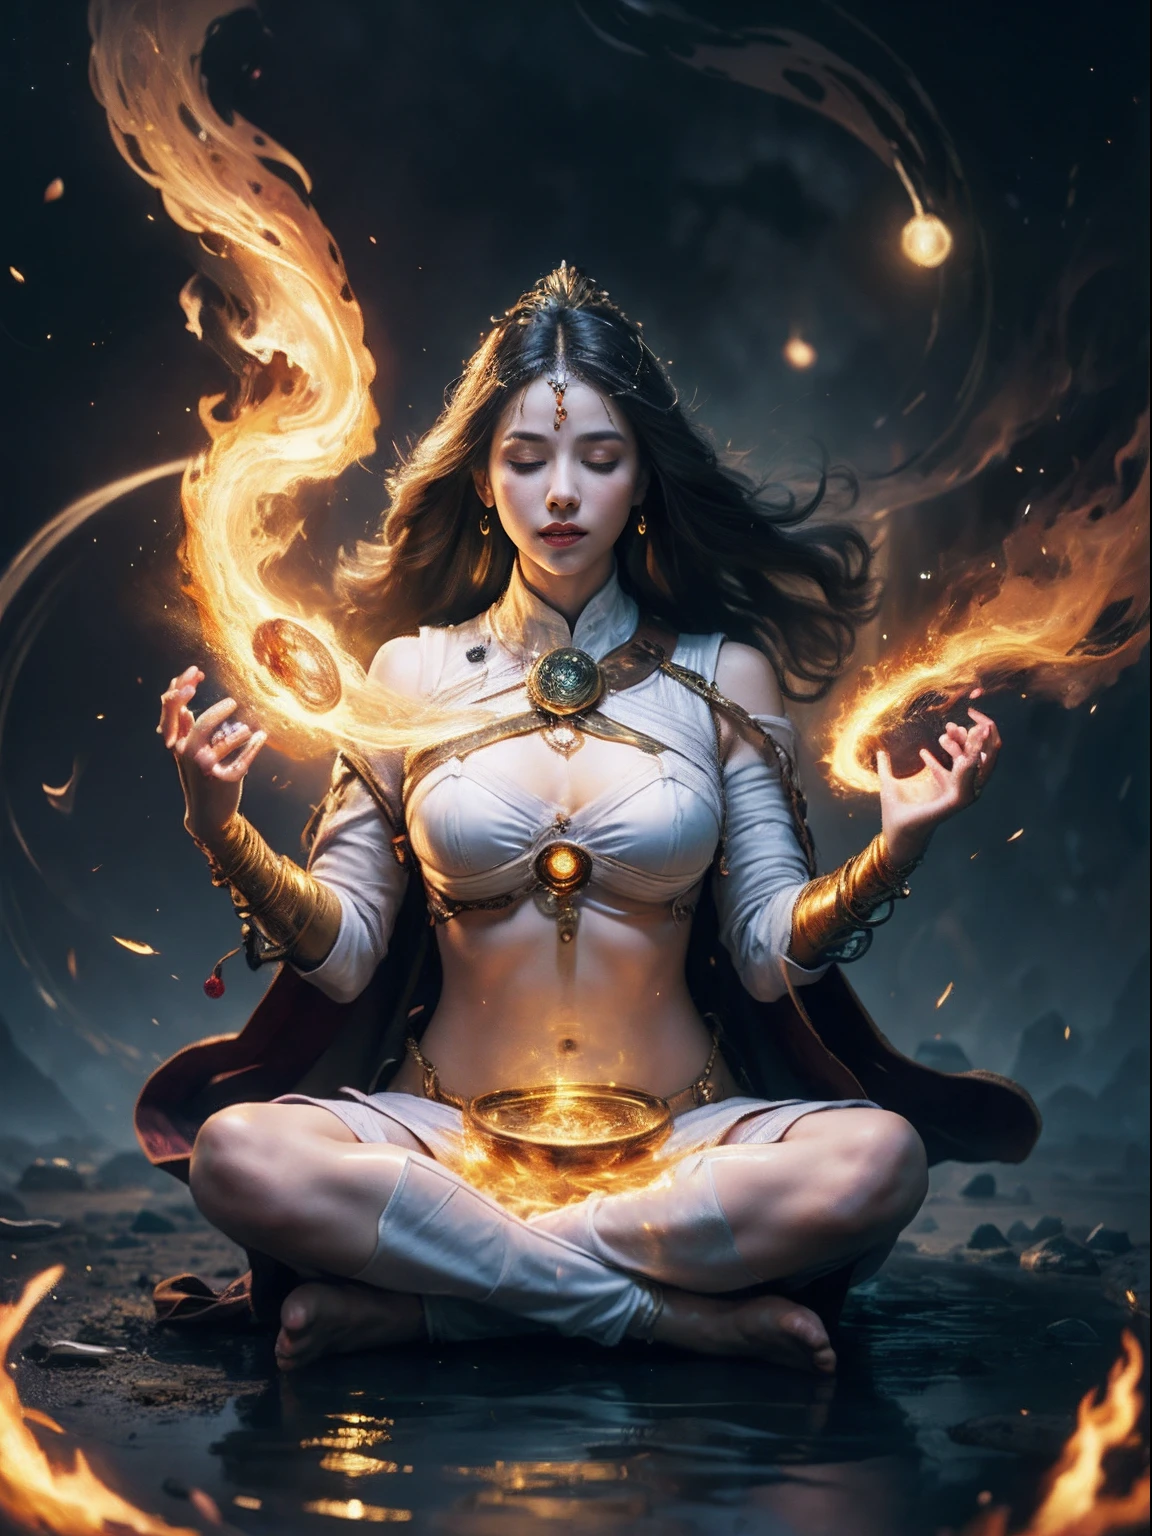 Immortal goddess, super beautiful, 8k, super big breasts, meditating, light white cloth covering part of her body, sitting cross-legged, golden glowing magic circle rotating behind her, magical aura surrounding her parts, magical, fantasy, milky way background, (4  elements, fire, water, wind, earth, surround it),